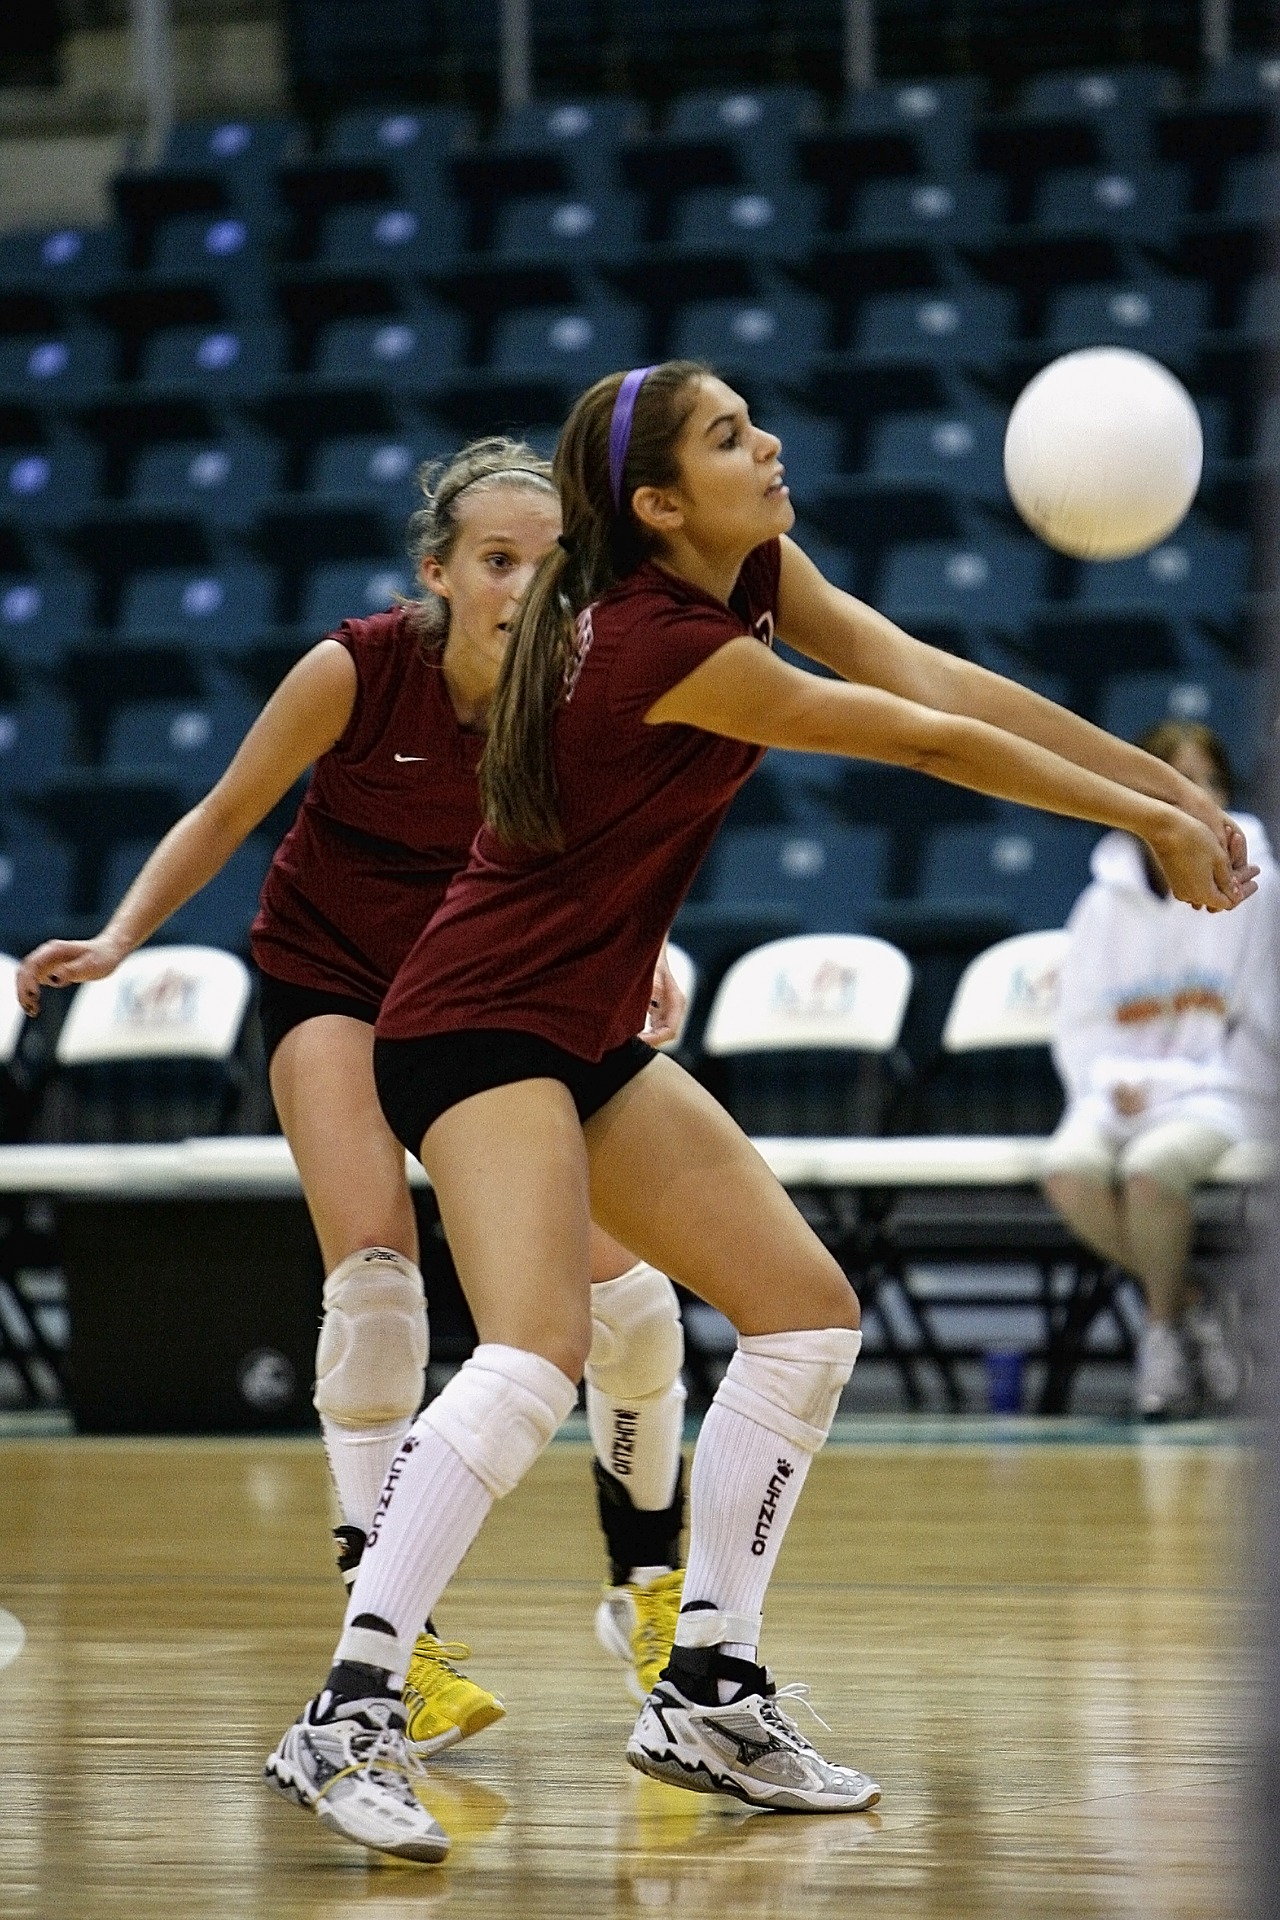 Understanding the Role of a Setter in Volleyball